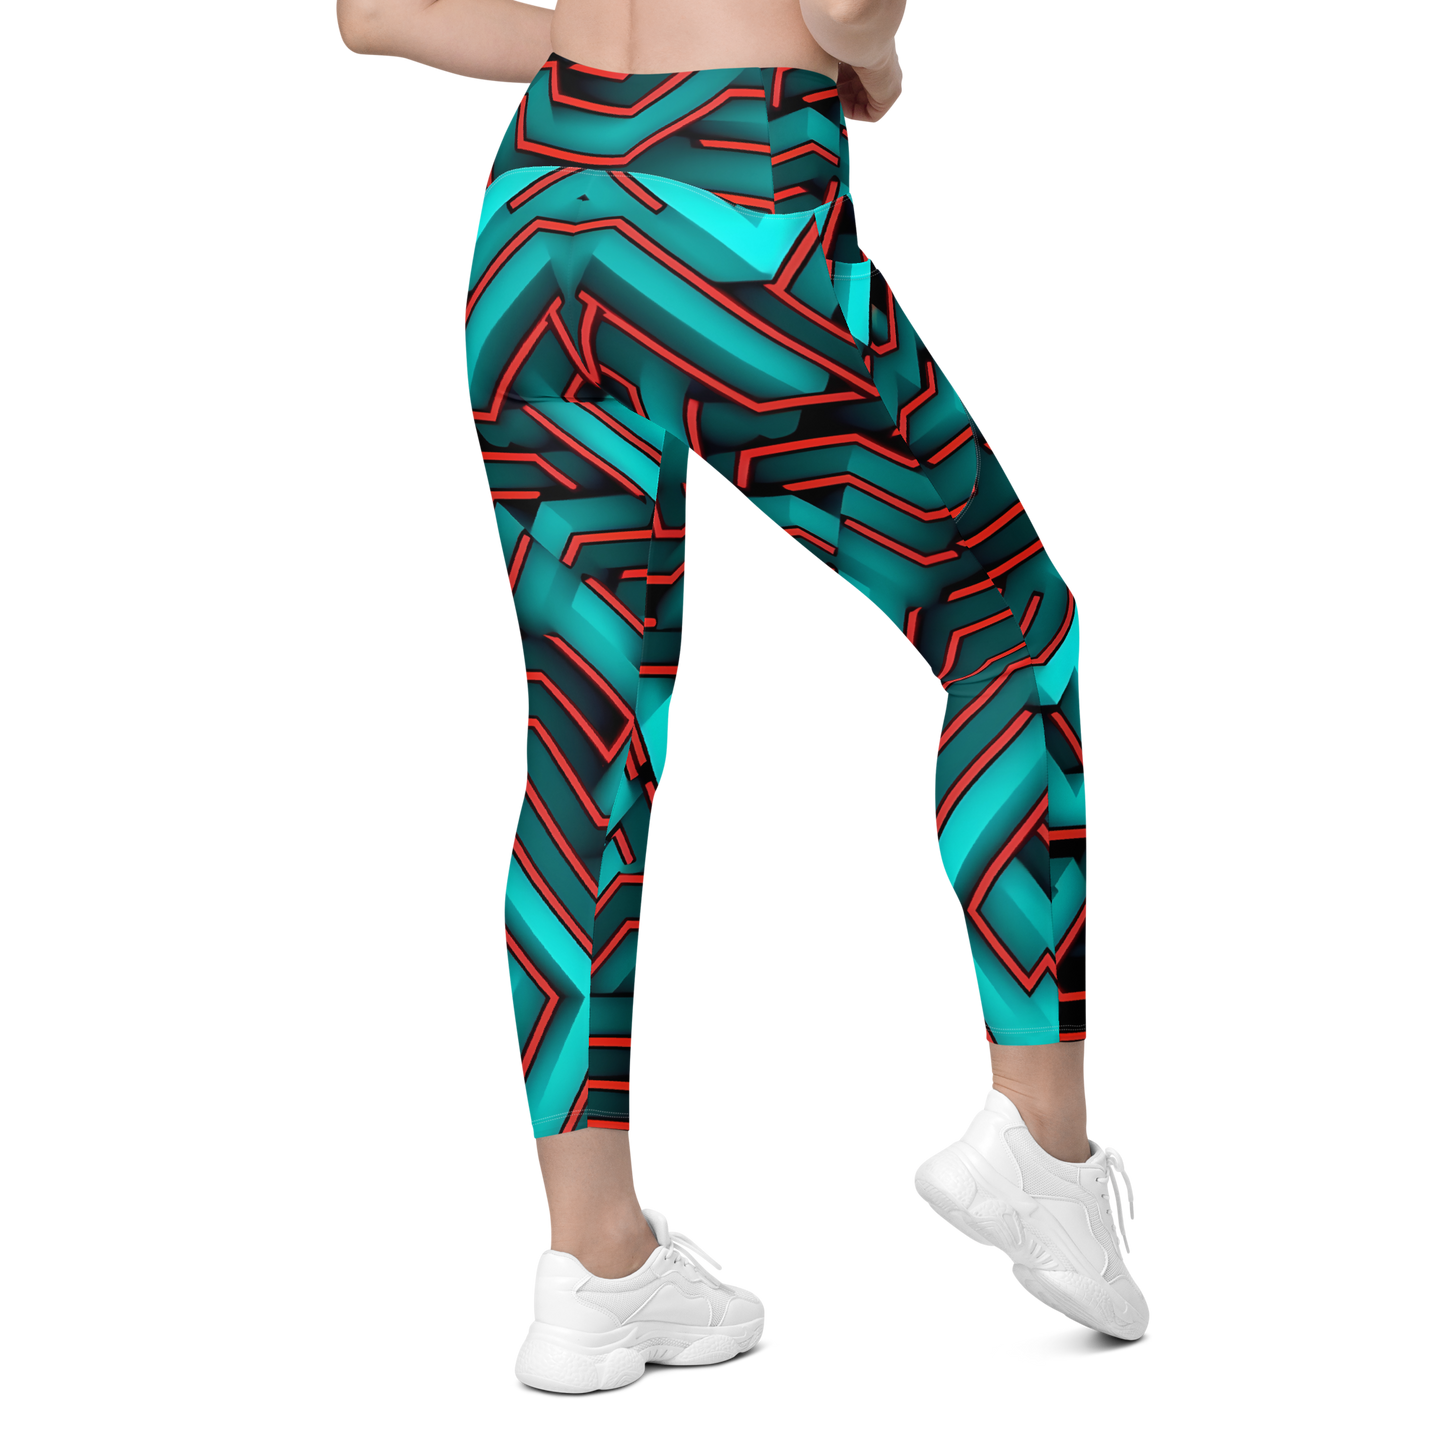 3D Maze Illusion | 3D Patterns | All-Over Print Crossover Leggings with Pockets - #2